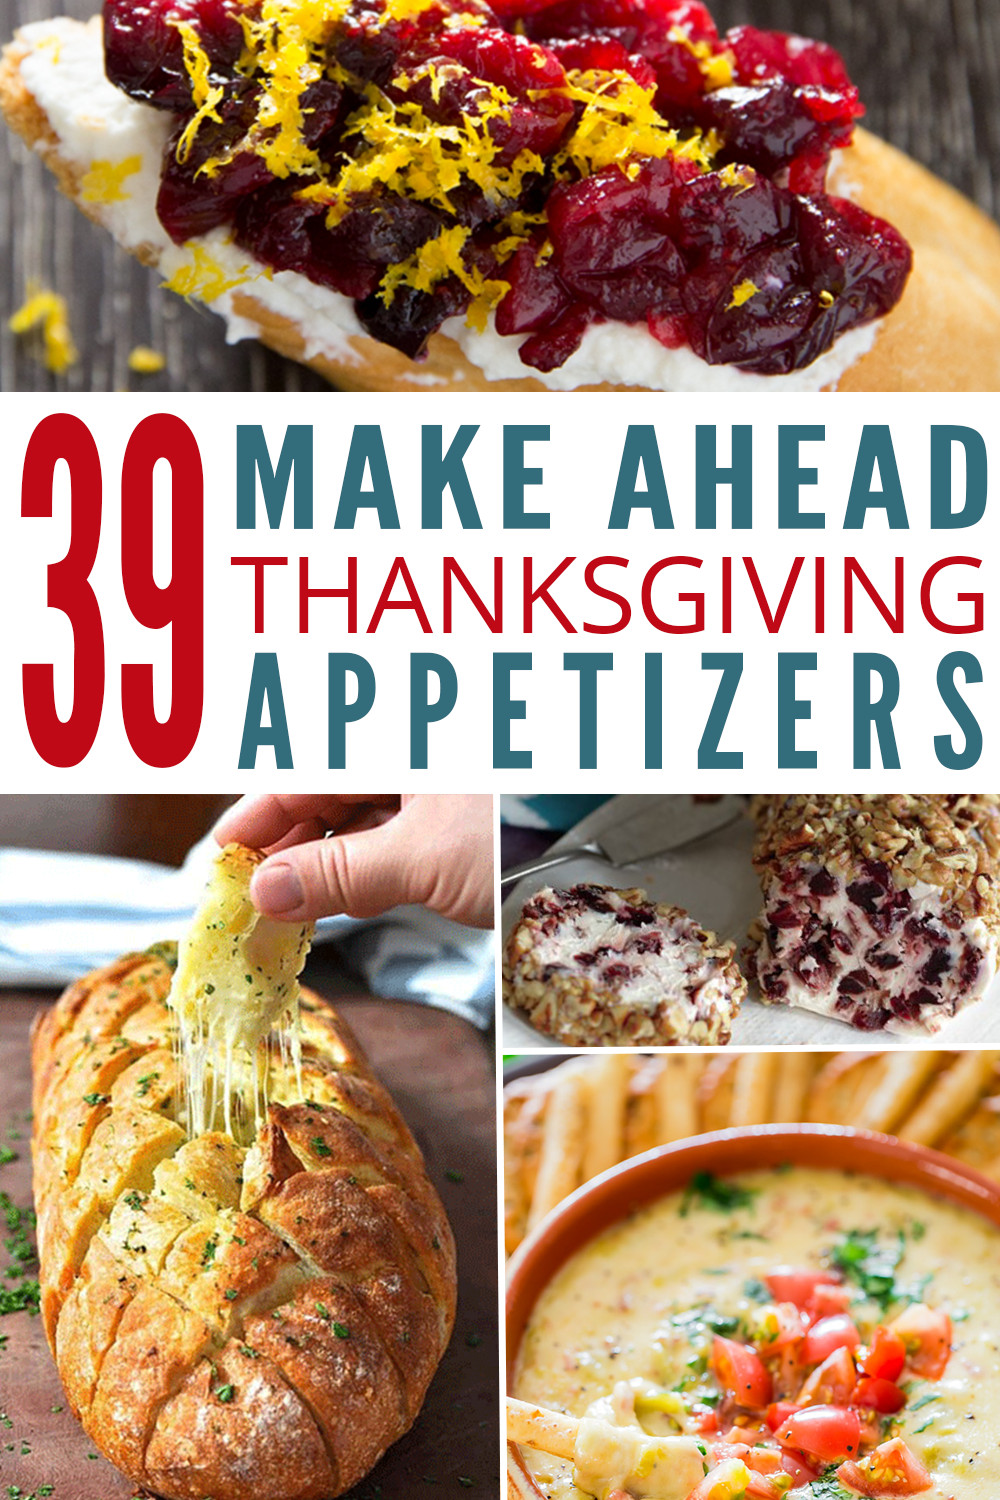 Make Ahead Thanksgiving Appetizers
 39 easy and delicious make ahead Thanksgiving appetizers